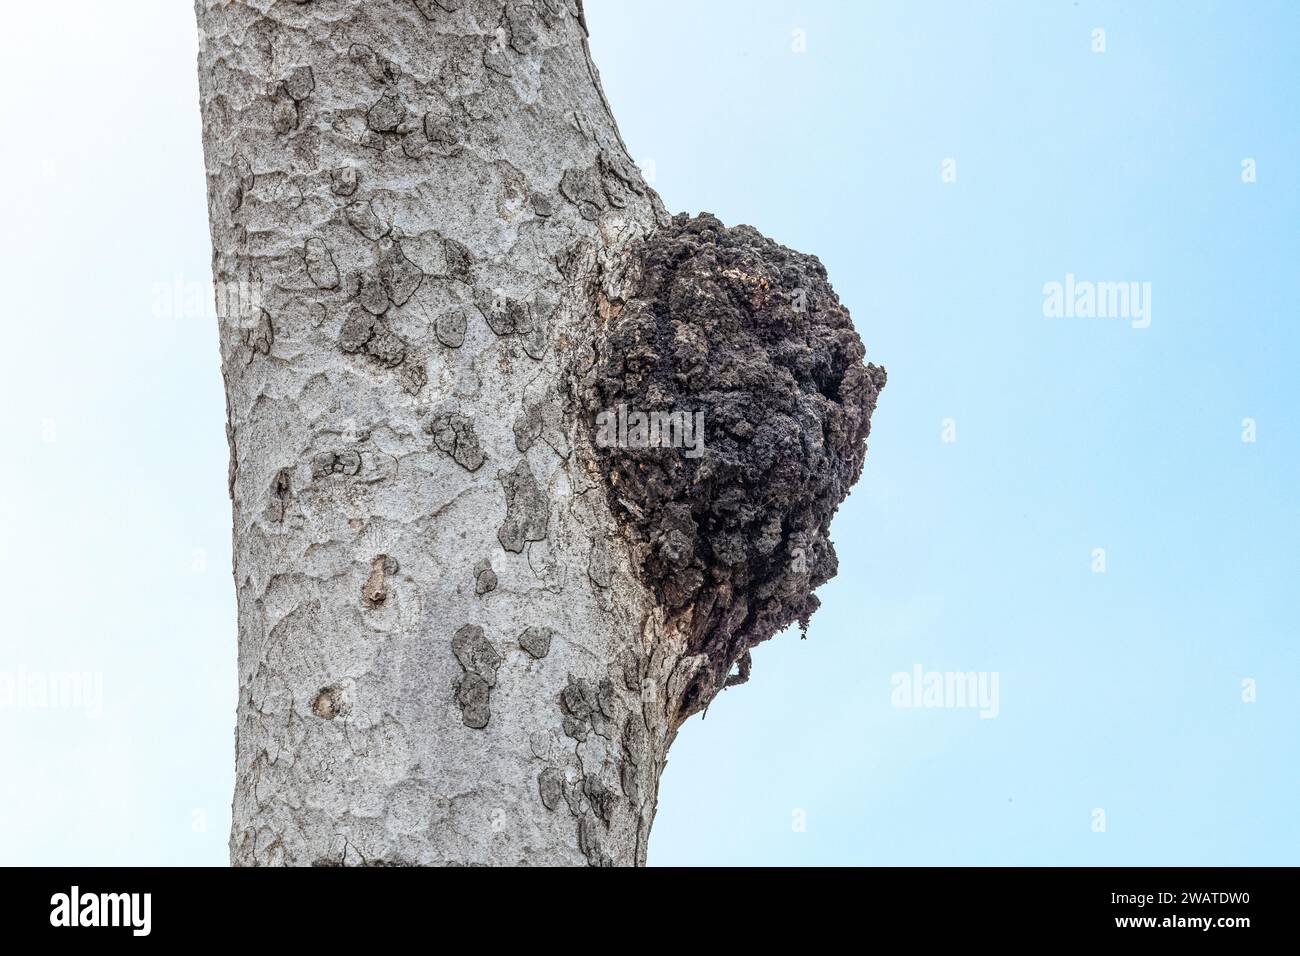 Gall on large-leaved star-chestnut tree, Sterculia quinqueloba, Majete Wildlife Reserve, Malawi Stock Photo